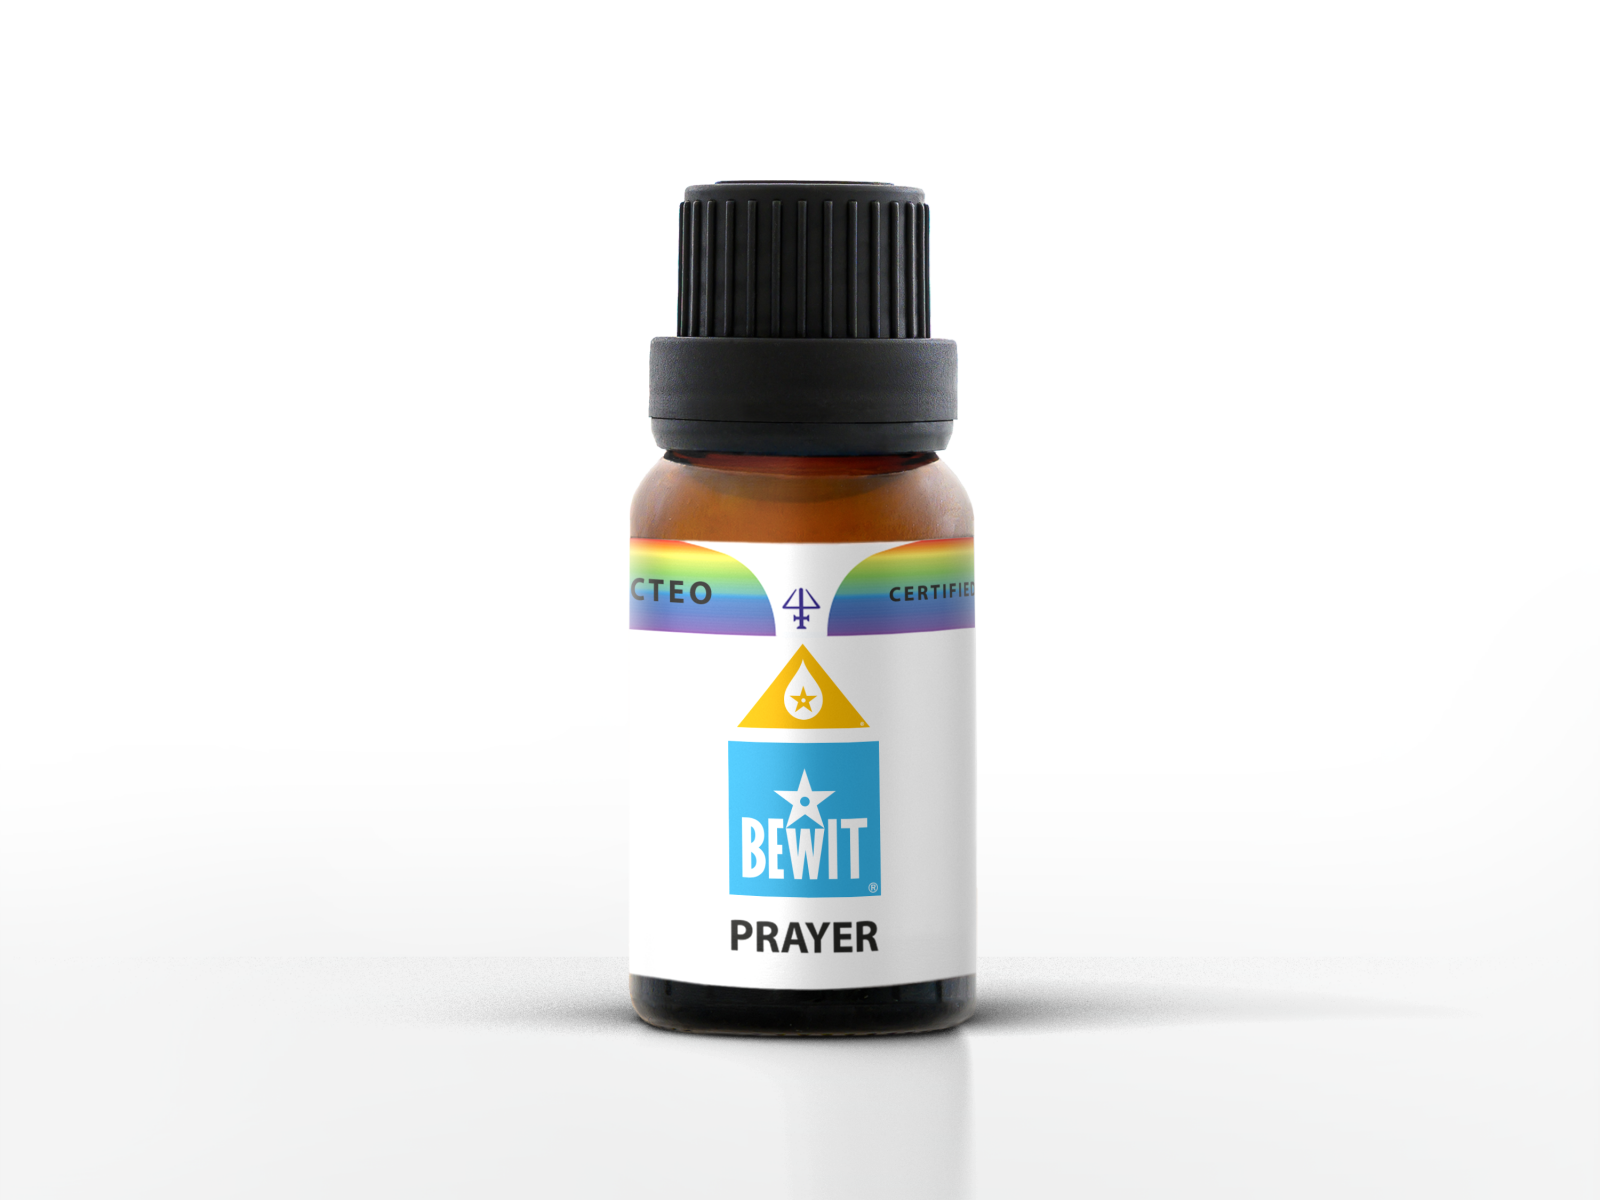 BEWIT PRAYER - Blend of the essential oils, 15 ml